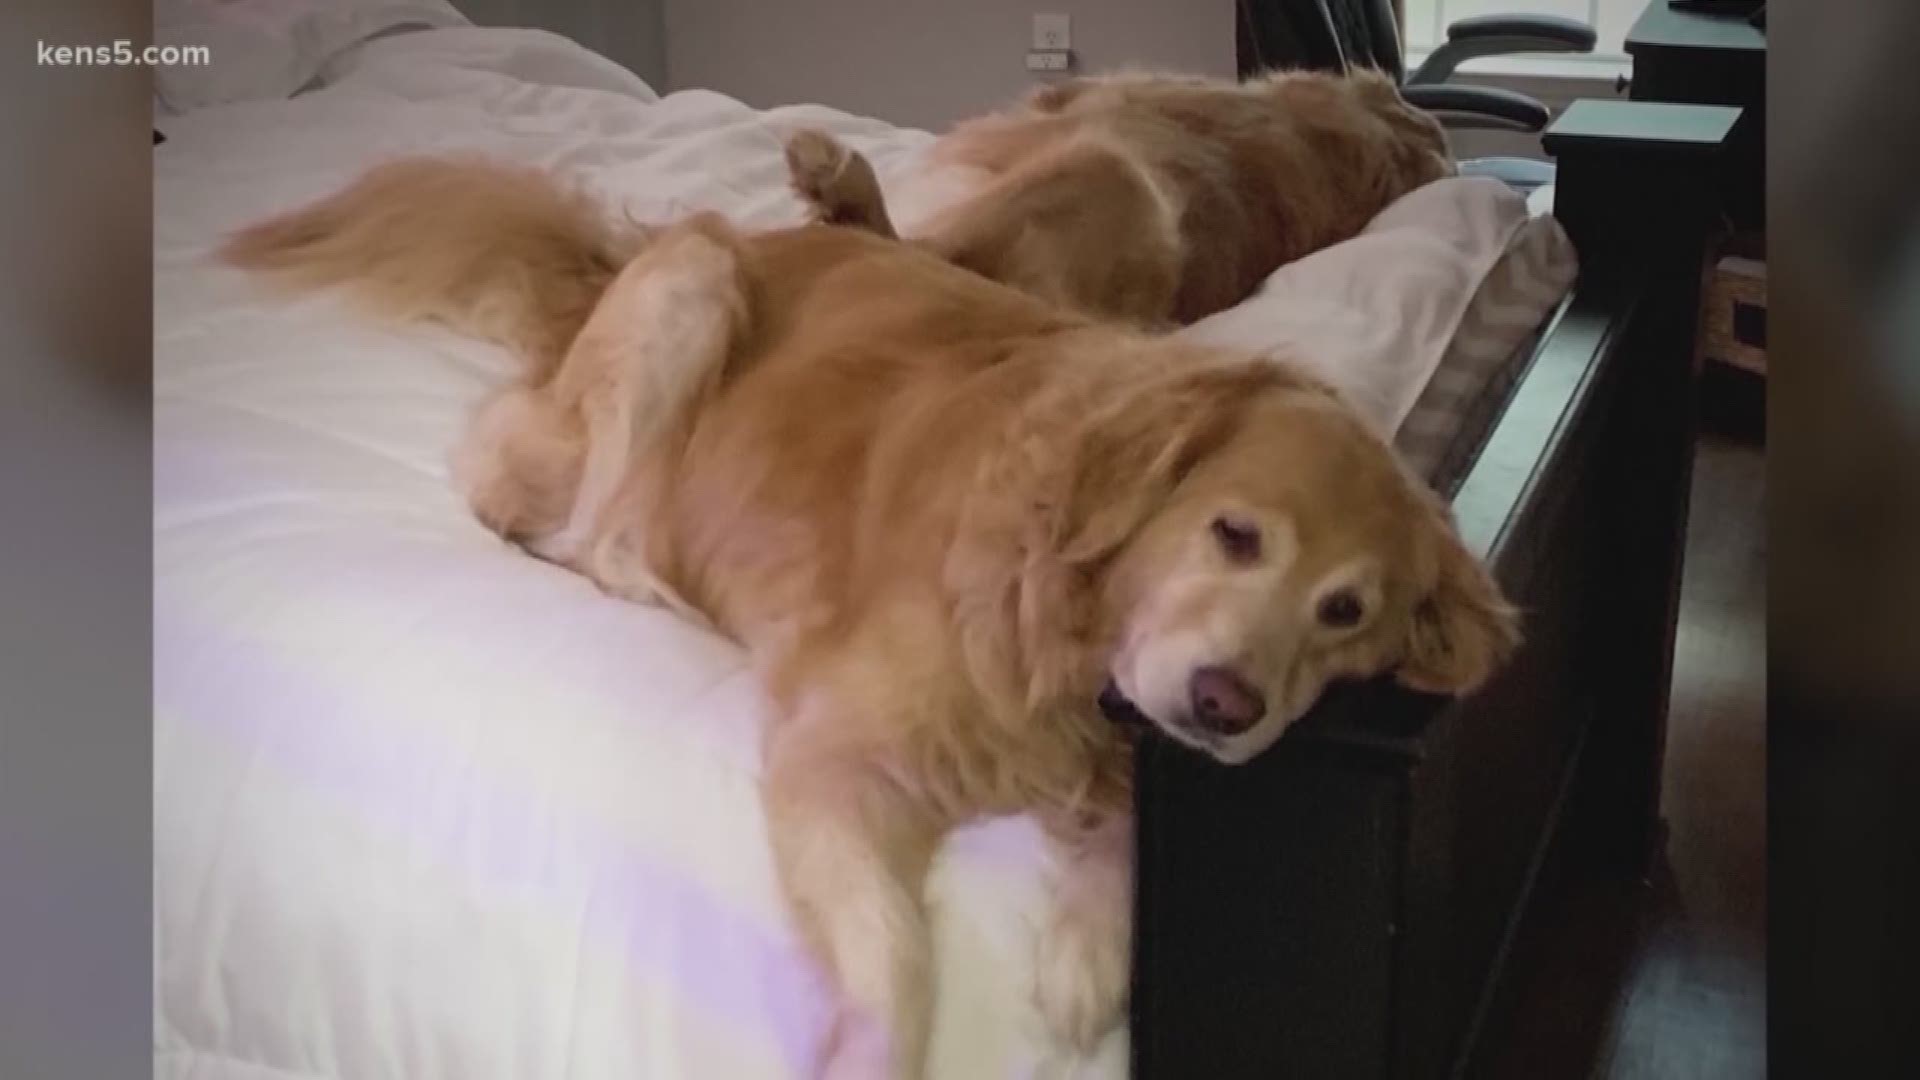 The couple even consulted with pet detectives, but there are still no signs of Acoria and Ripley. A pet sitter lost the golden retrievers four weeks ago.